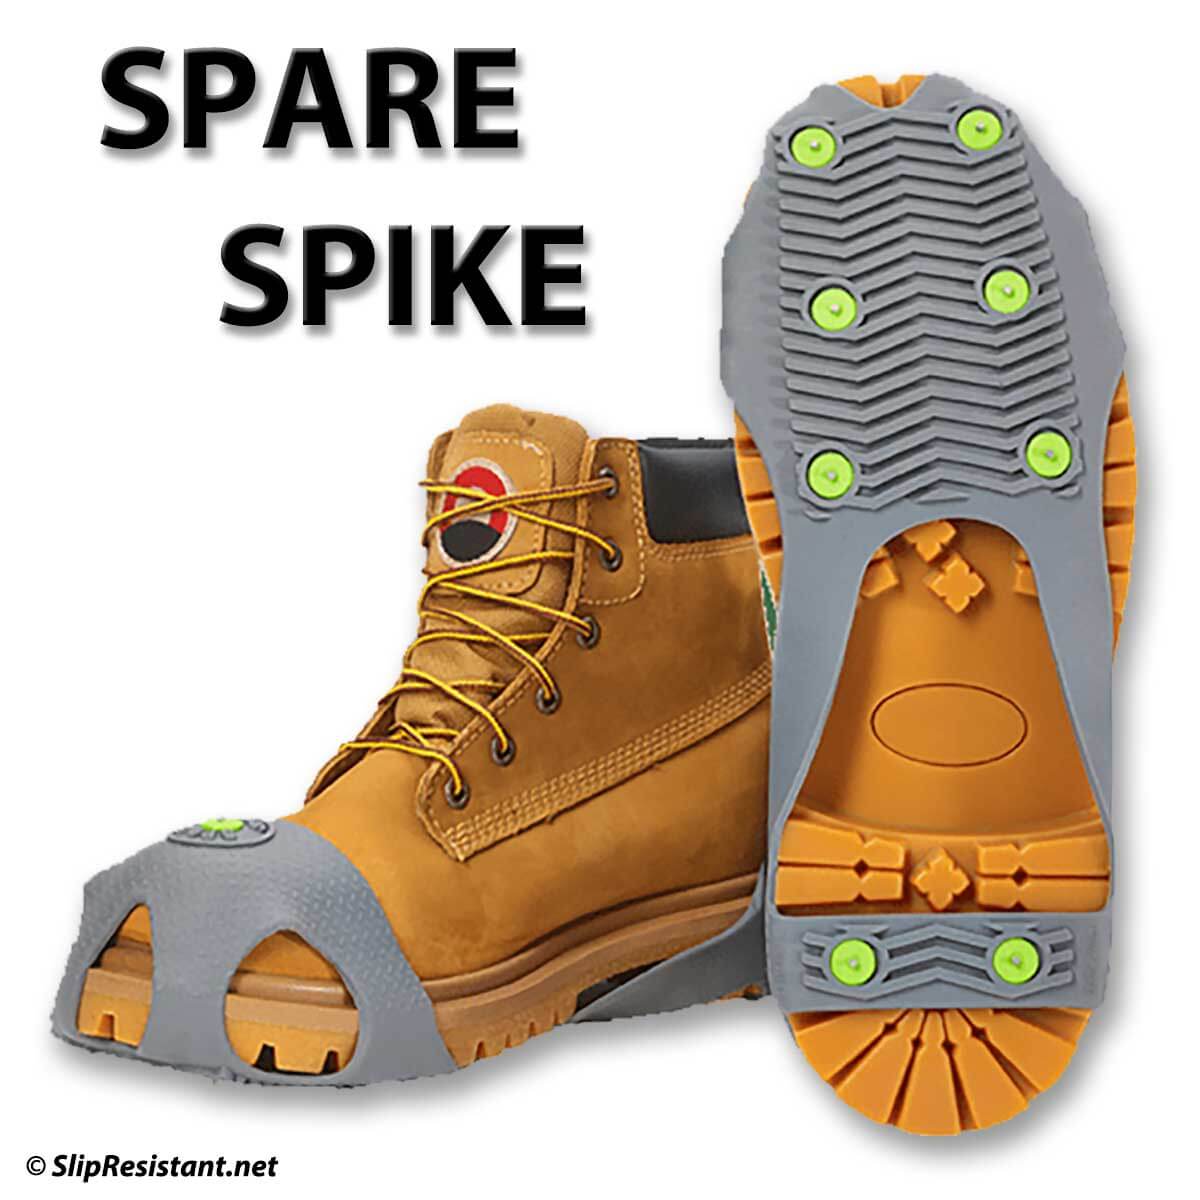 Winter Walking SPARE SPIKE™ Ice Cleats for Shoes and Boots